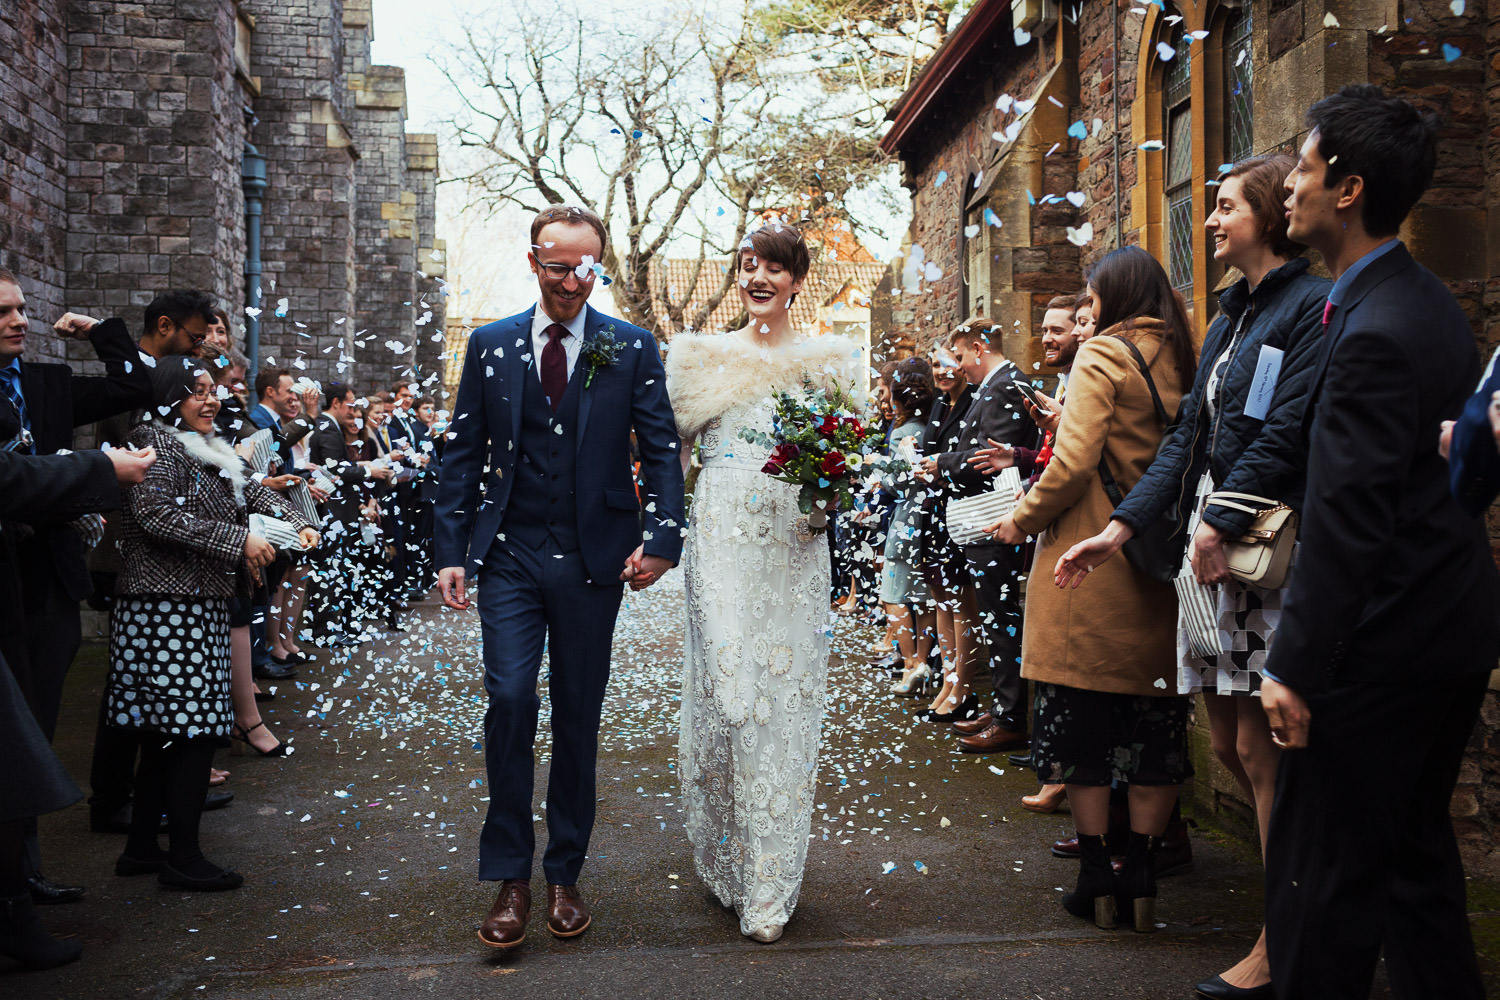 Confetti hearts falling on a man and woman after their wedding ceremony at St Alban's Church of Westbury Park Bristol wedding